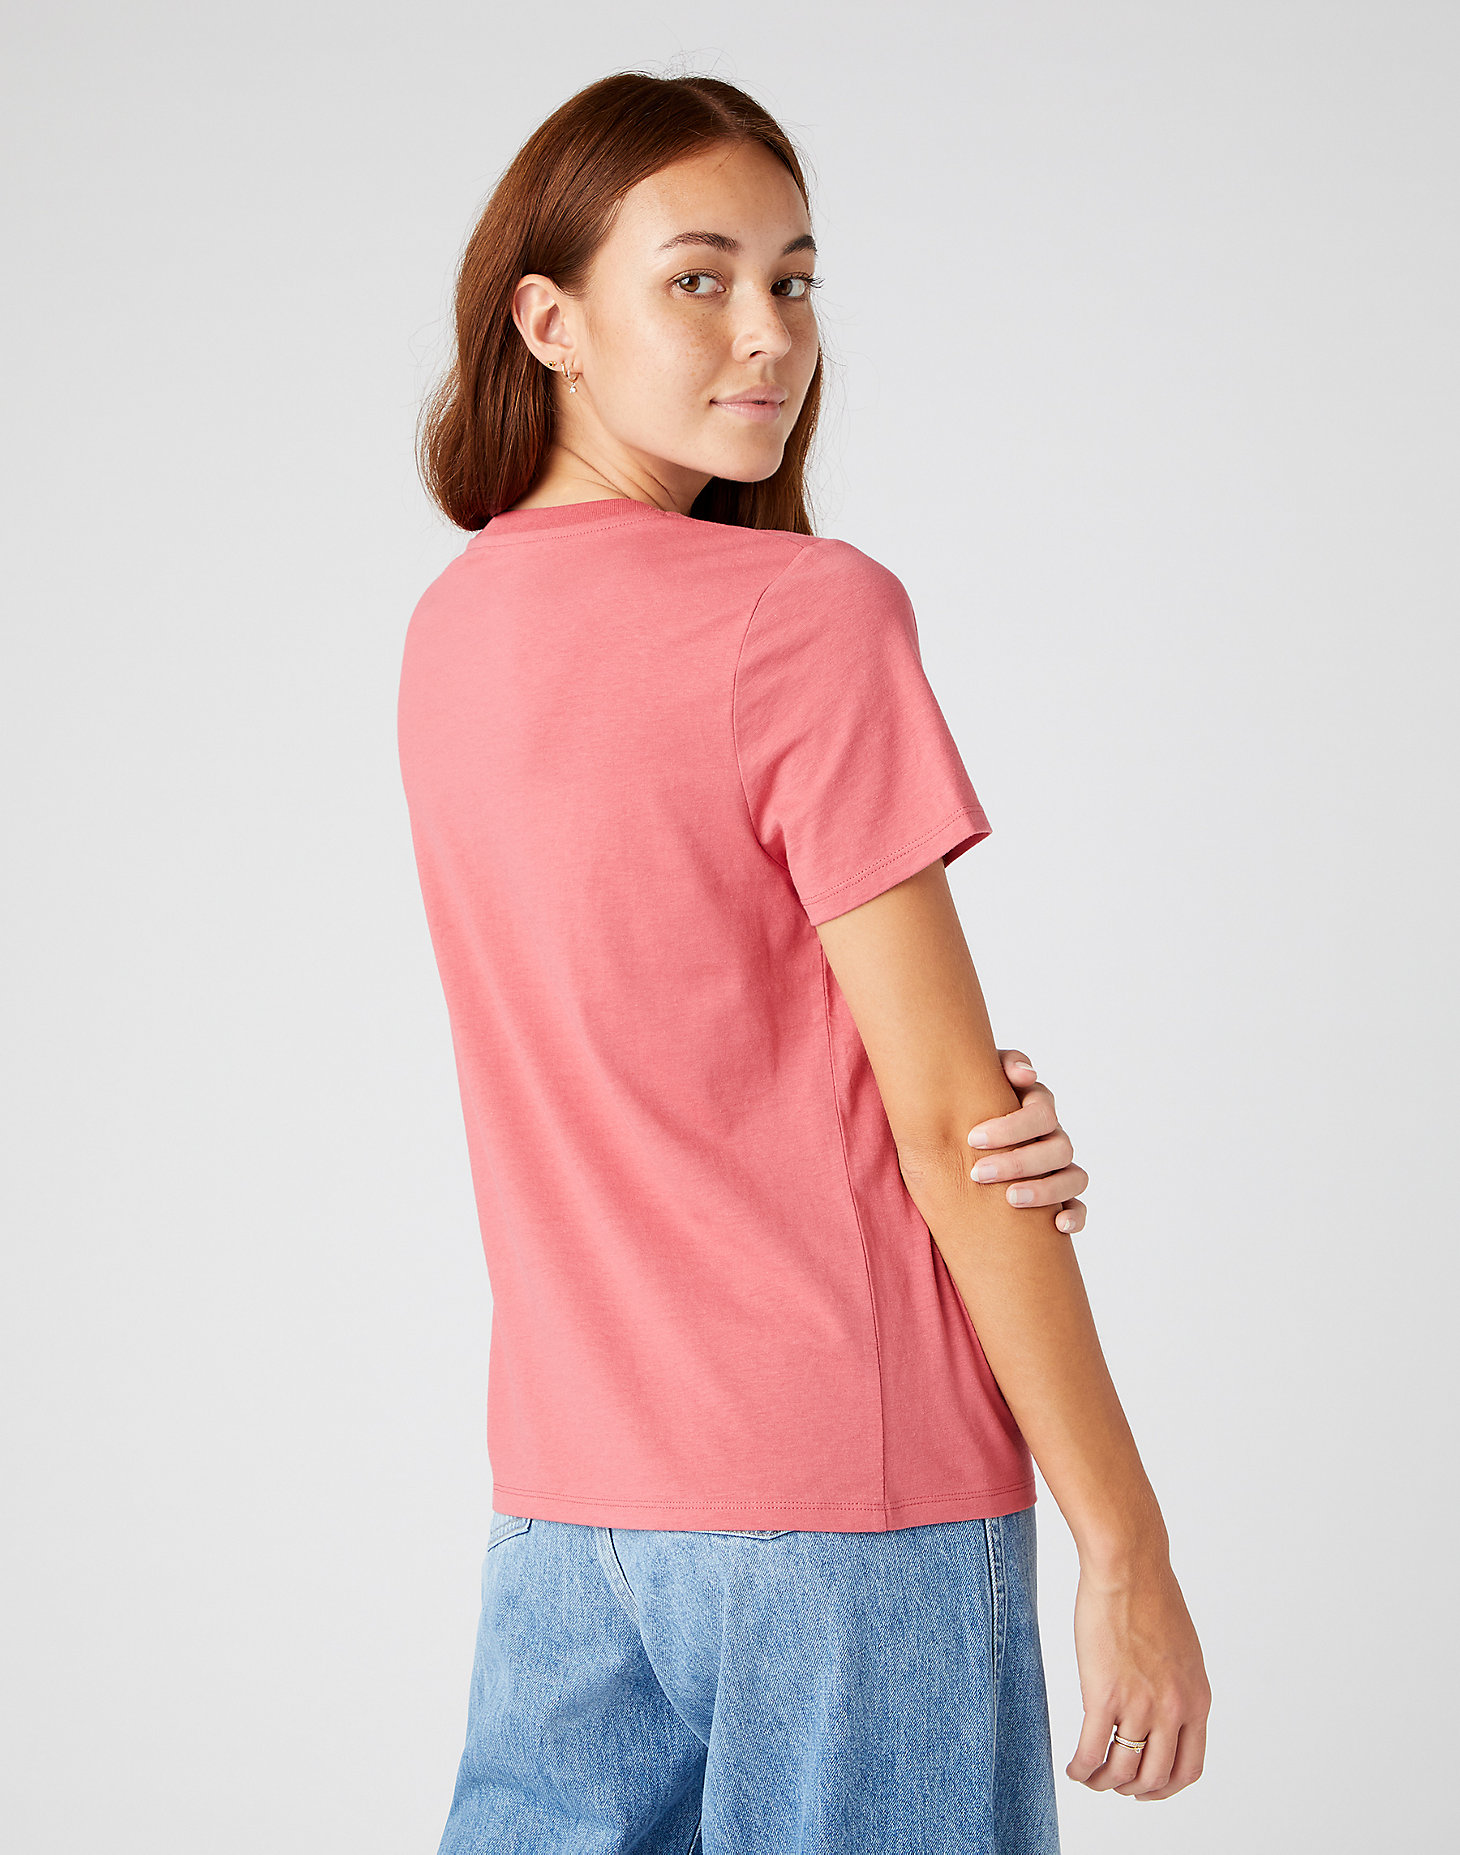 Round Tee in Holly Berry alternative view 2